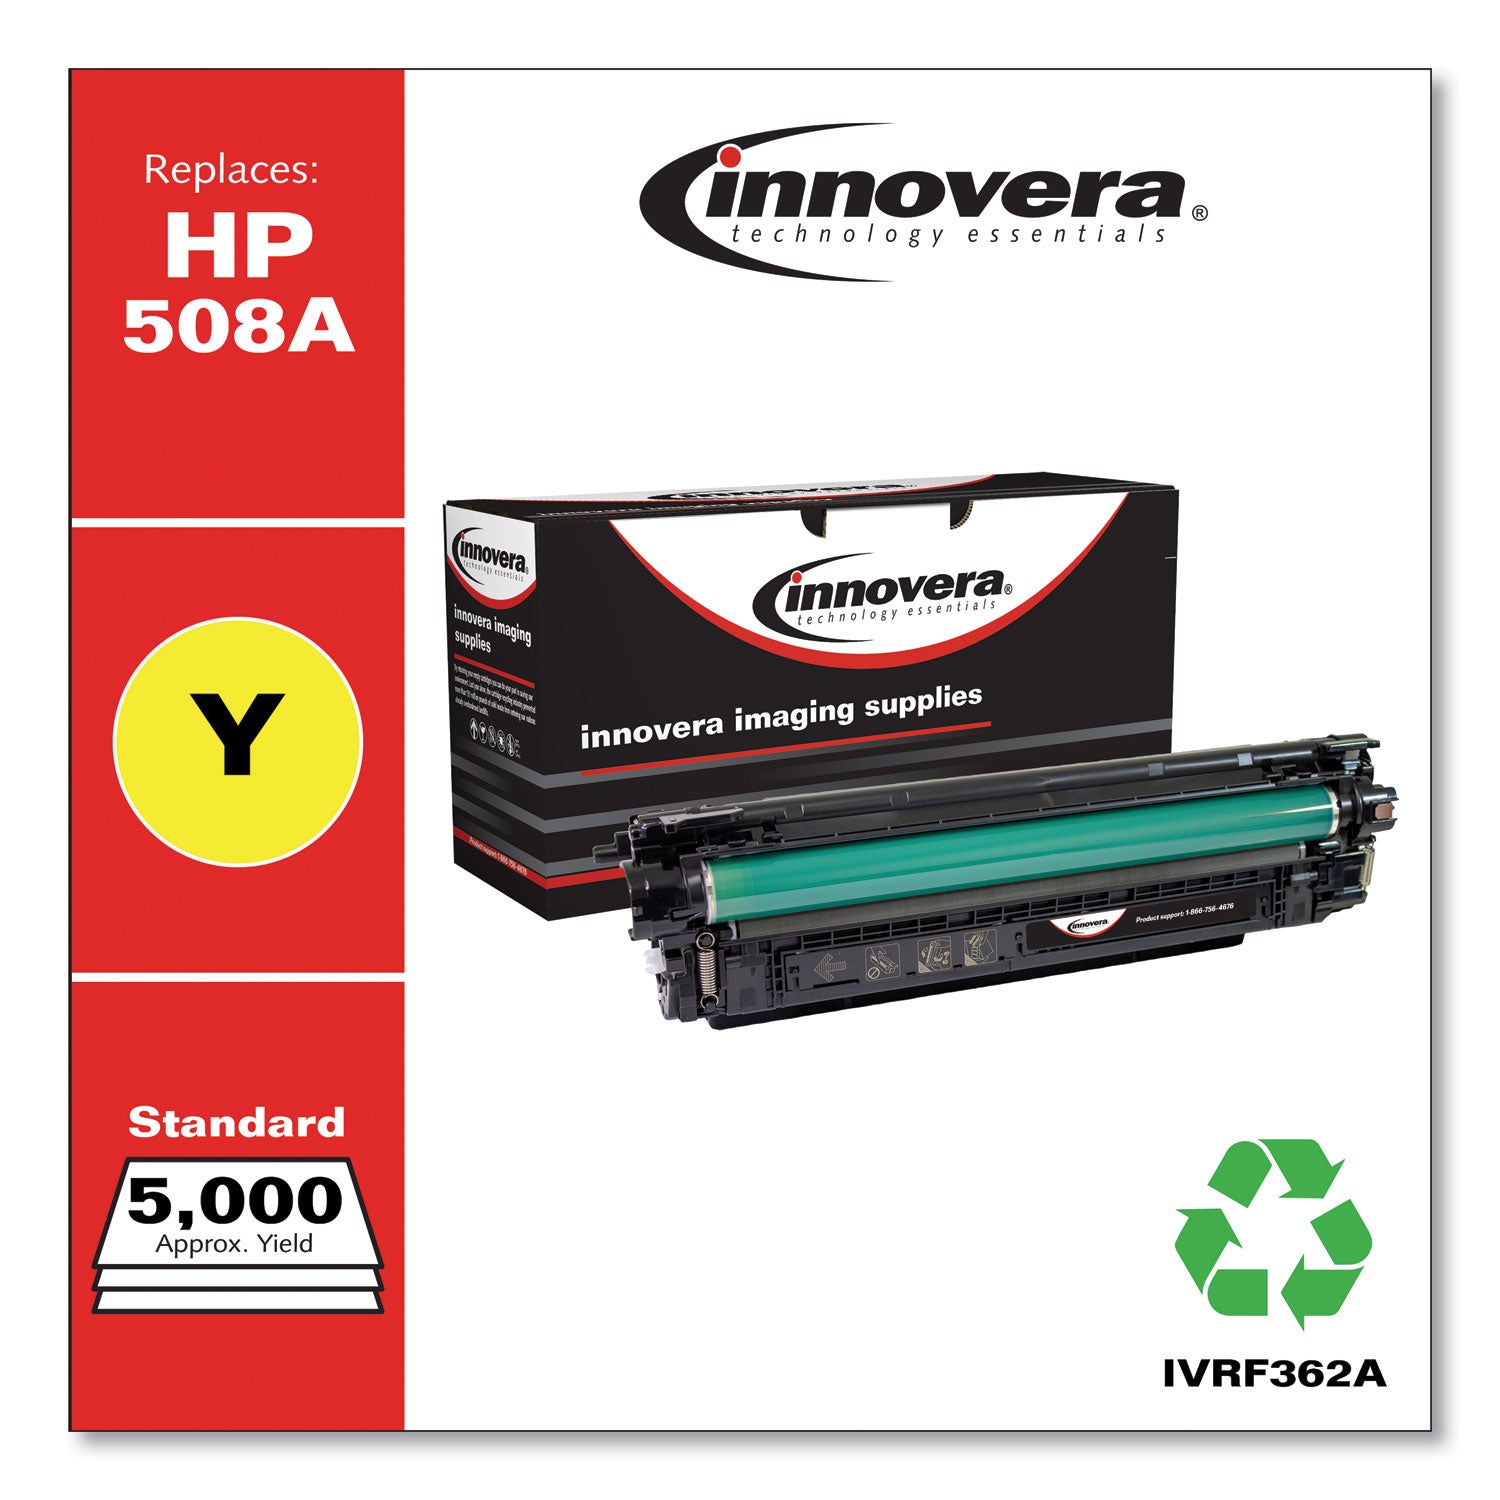 remanufactured-yellow-toner-replacement-for-508a-cf362a-5000-page-yield_ivrf362a - 2